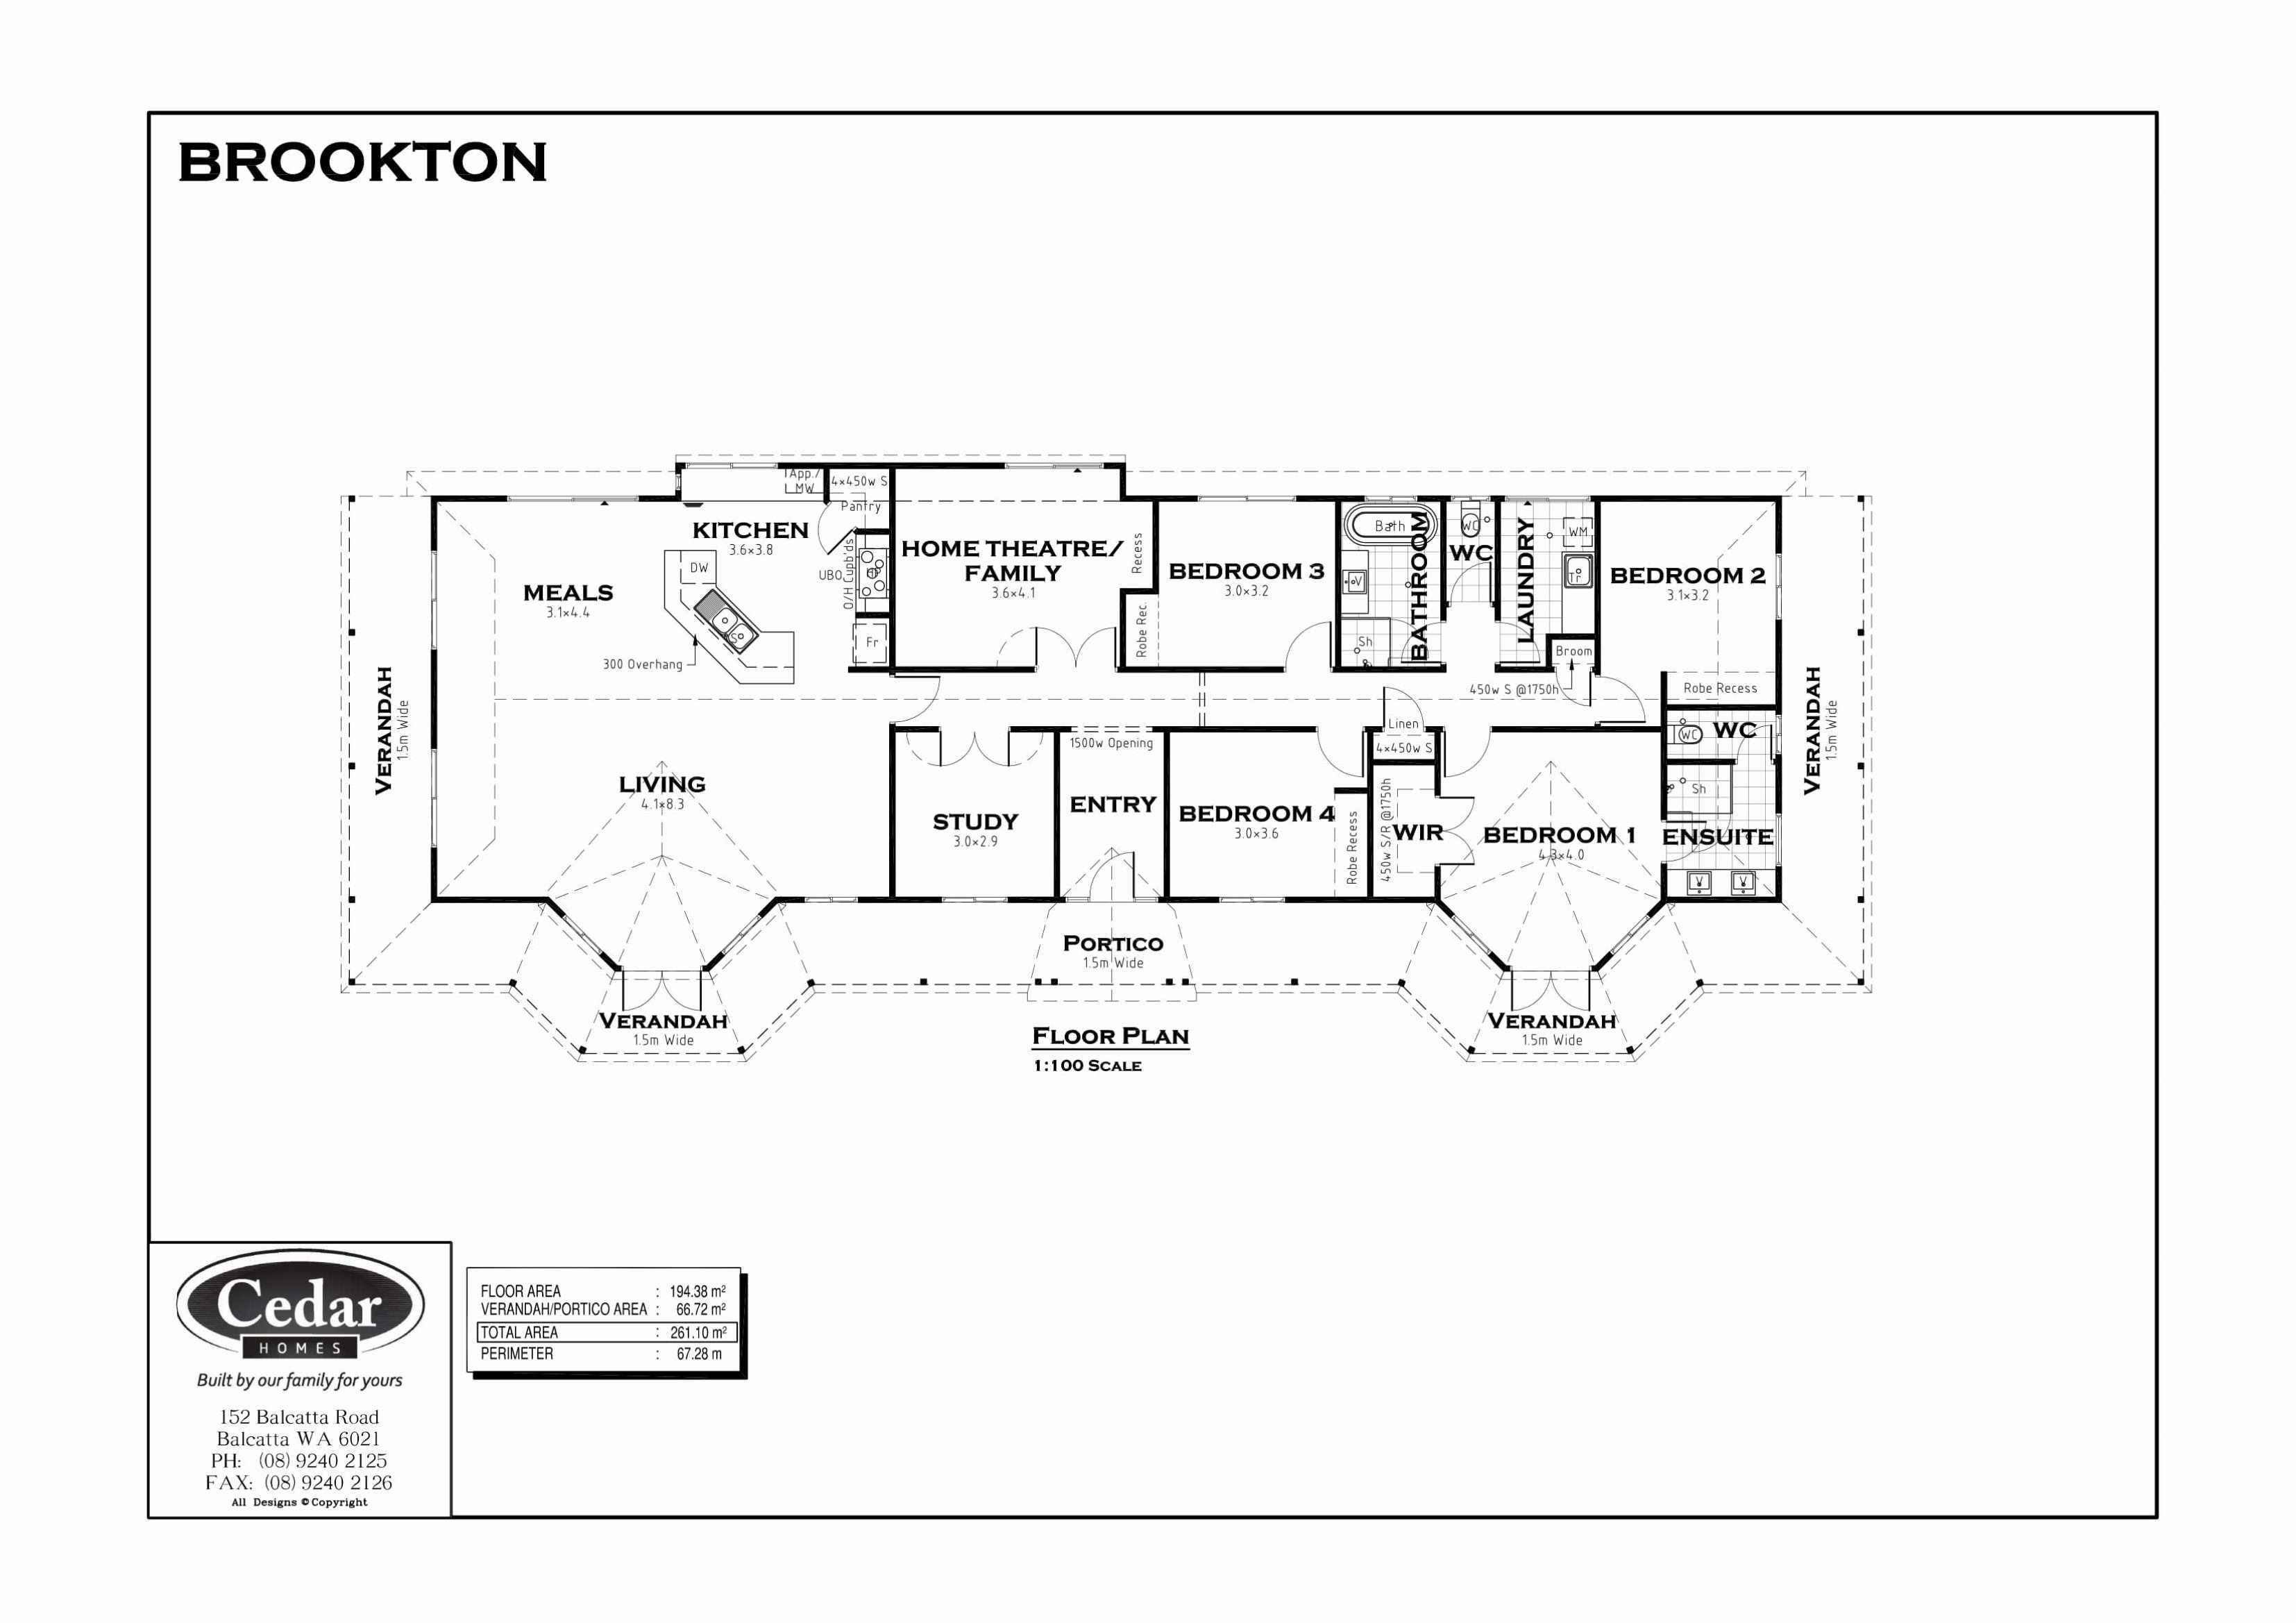 floor plan of the brookton design house floor plan against a white background